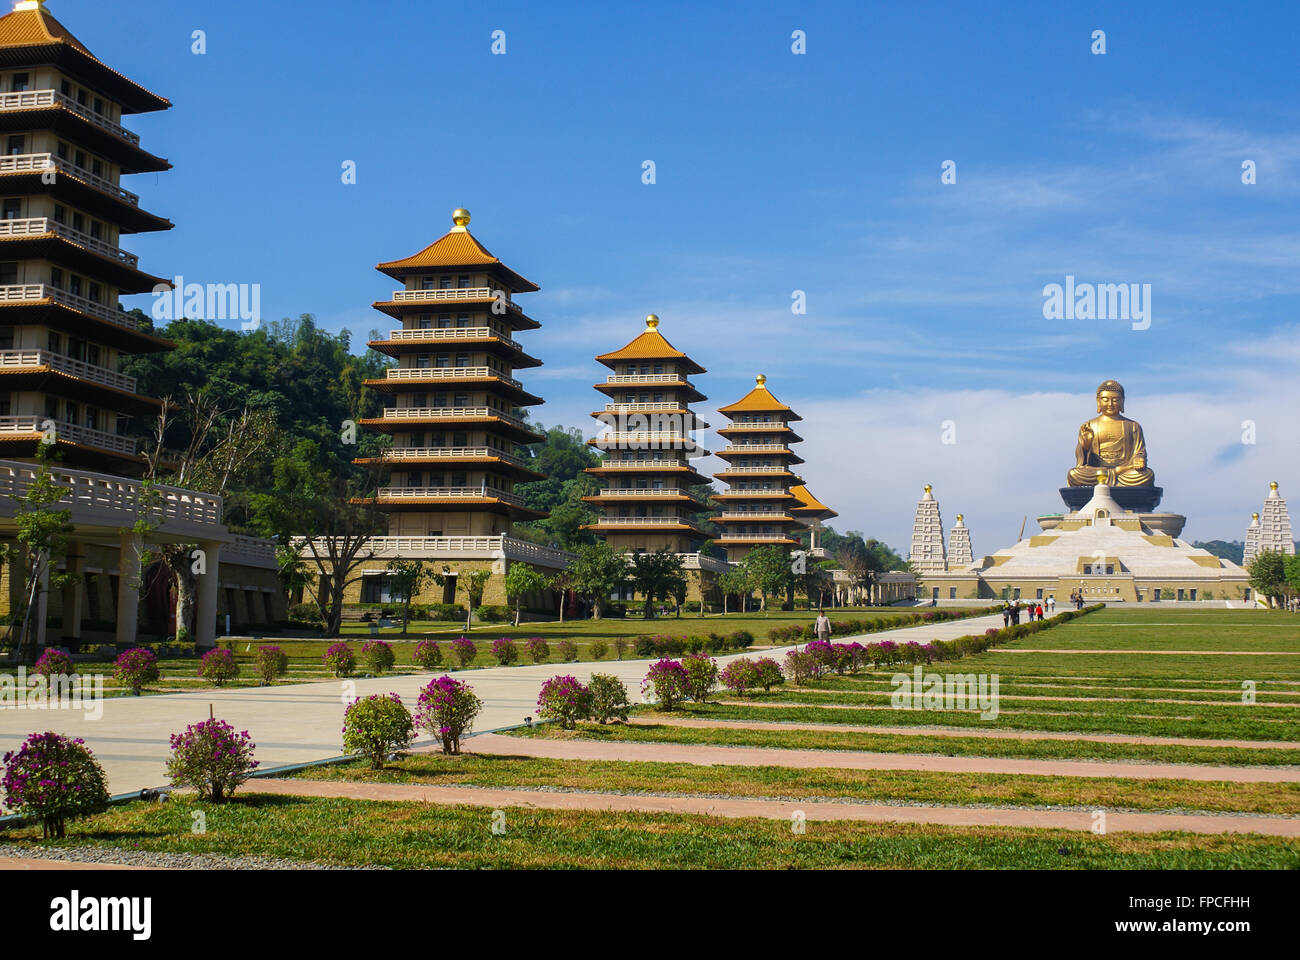 The giant Buddha statue at Fo Guang Shan in Kaohsiung, Taiwan Stock Photo